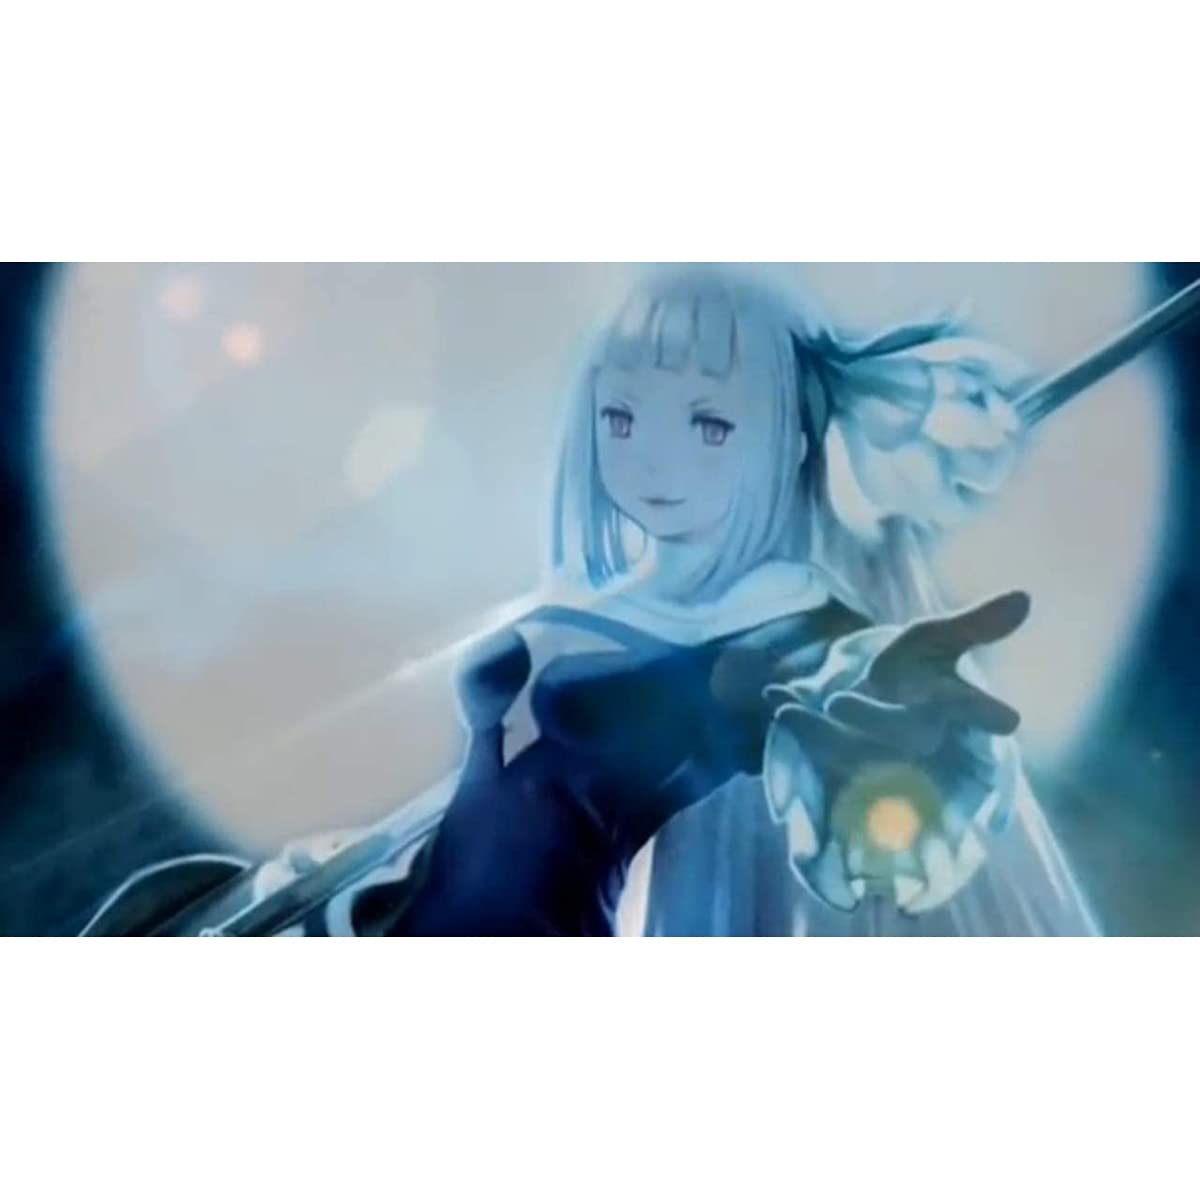 Bravely Second: End Layer - Nintendo 3DS